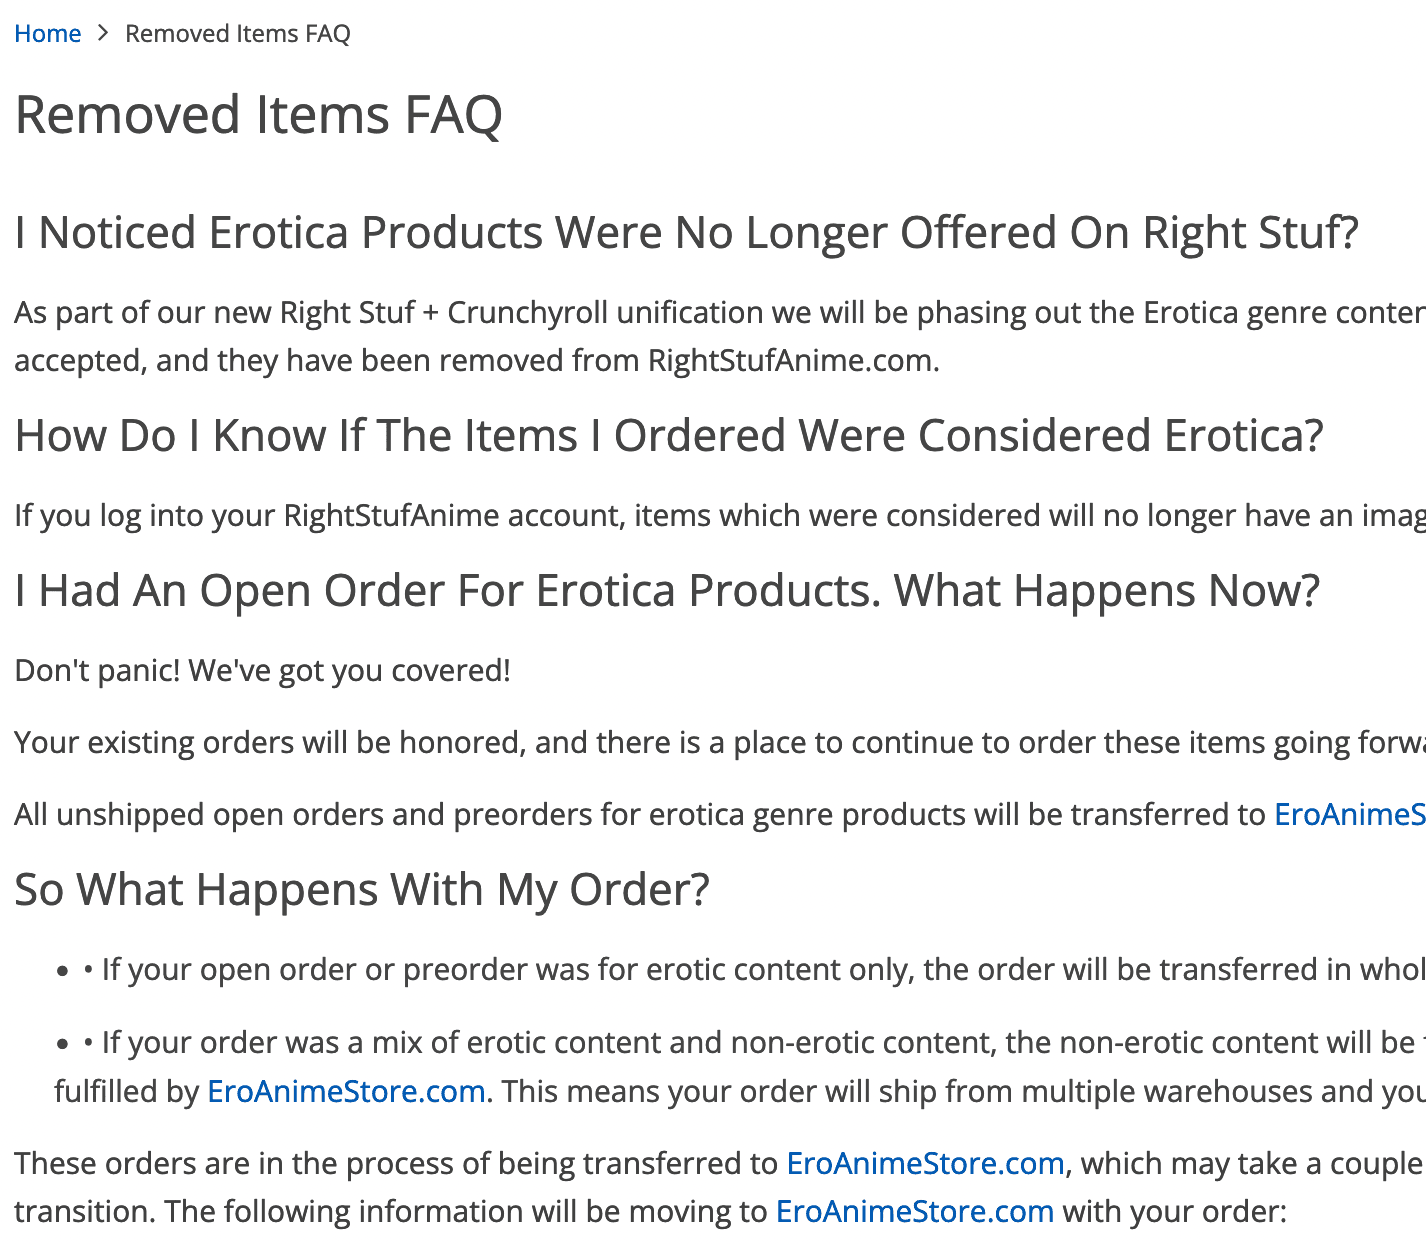 A list of various FAQ questions that mainly pertain to the RightStuf website no longer selling Erotica.